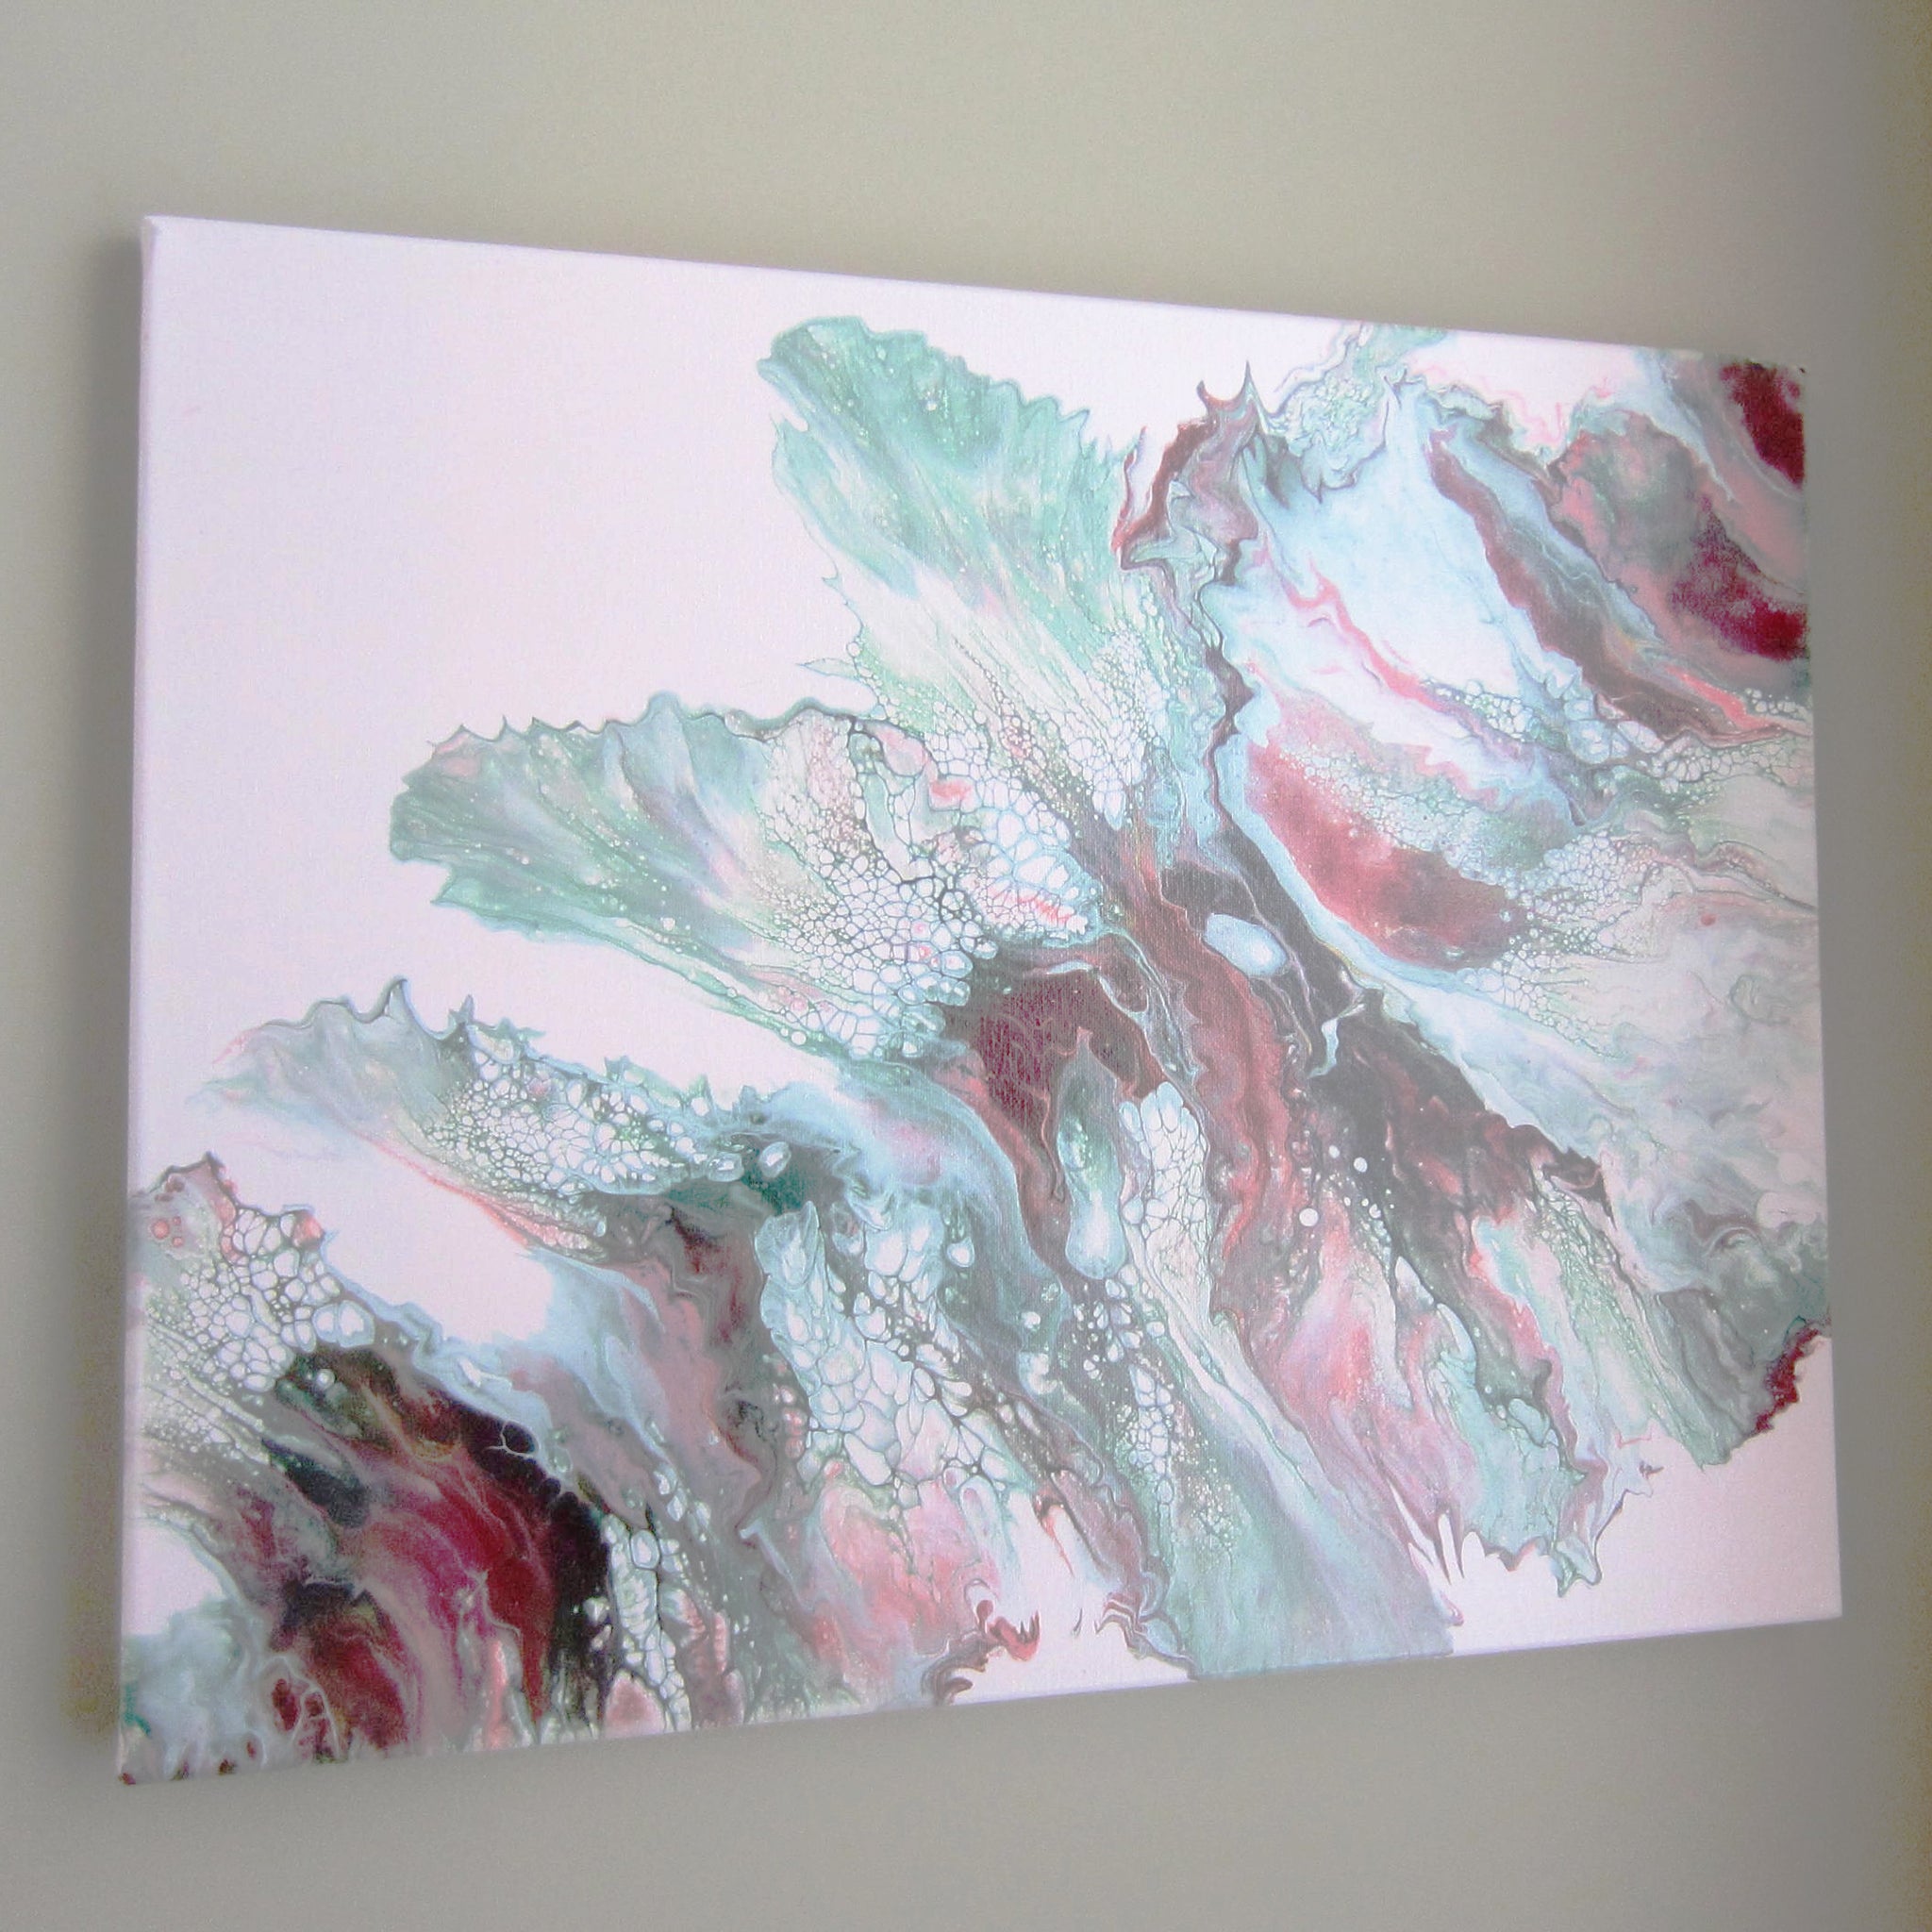 ORIGINAL Fluid Acrylic Pour Painting, Pink and Green Abstract